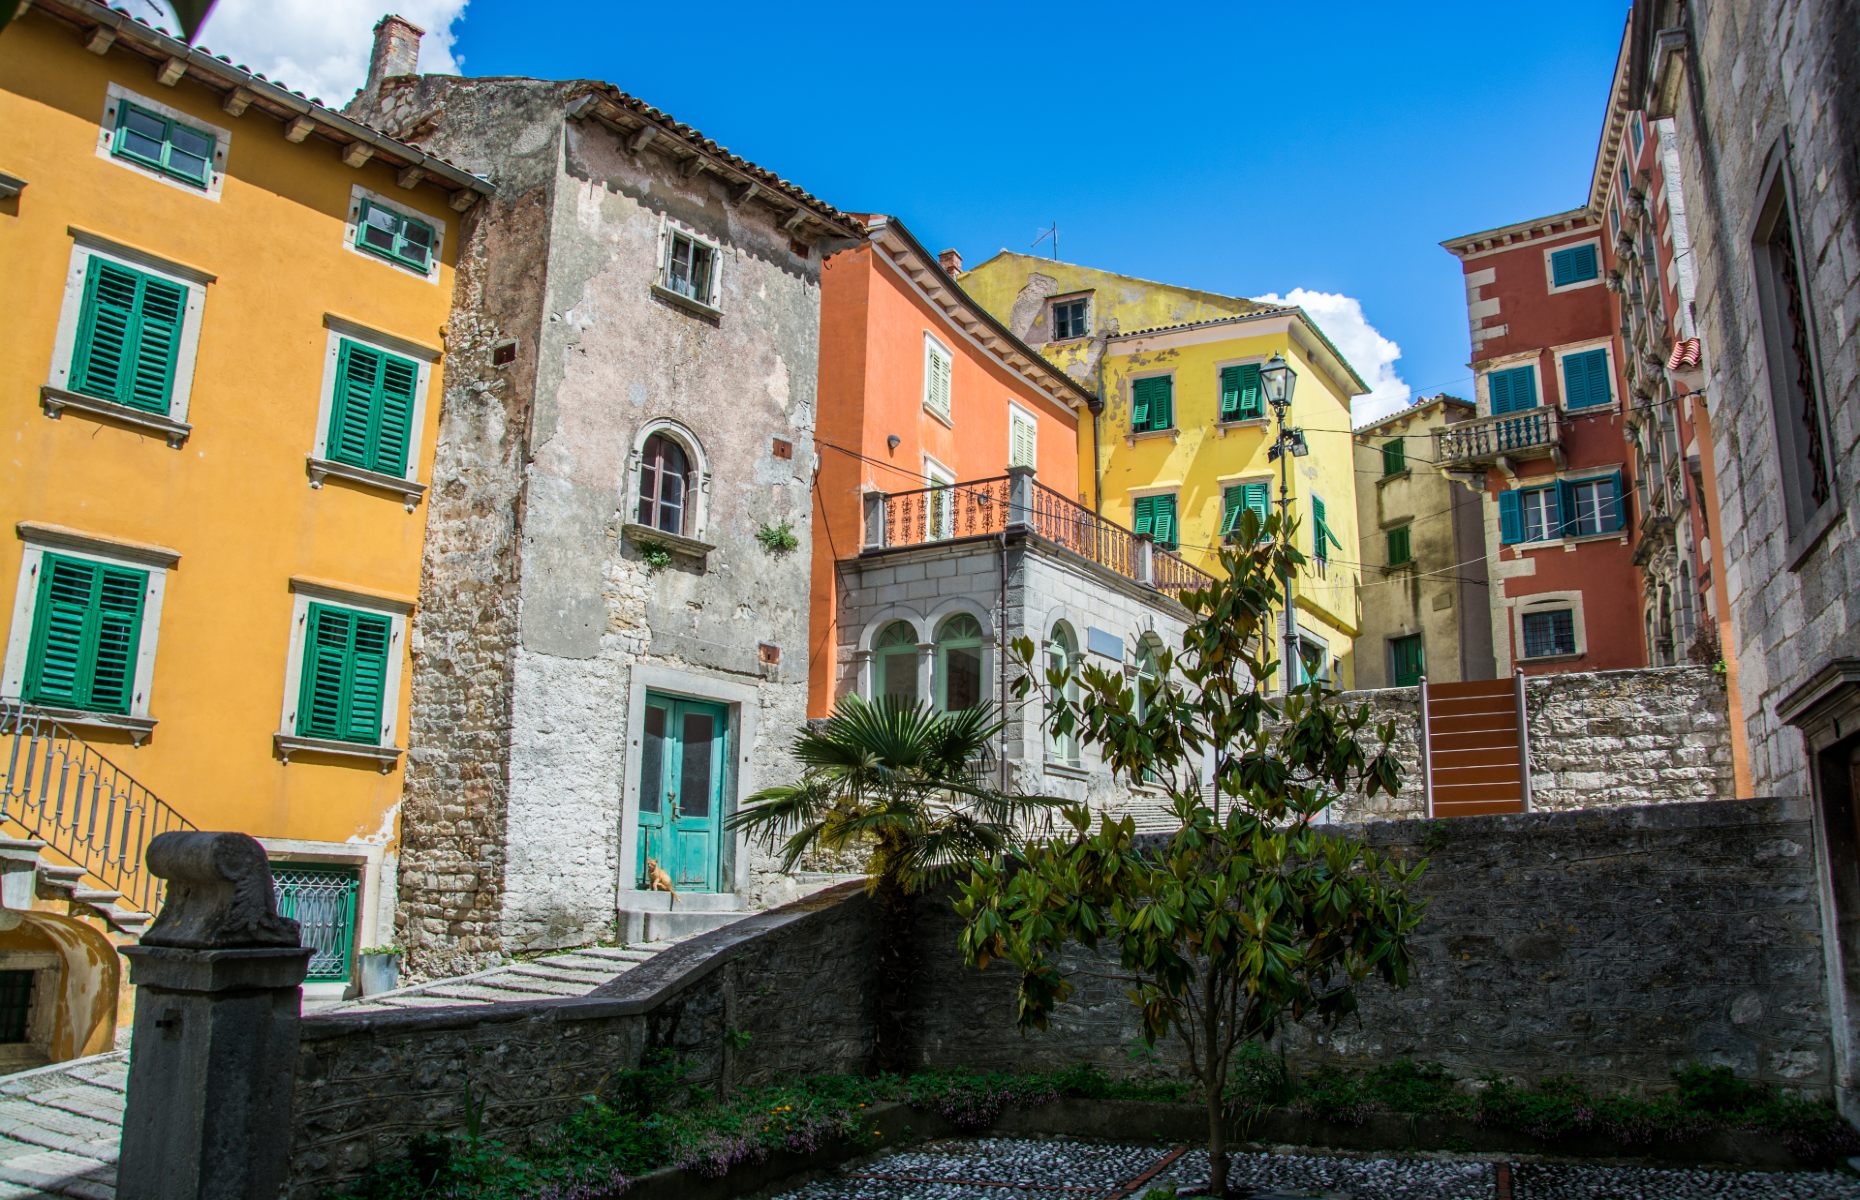 The little hill town of Labin with its colourful buildings (Image: U. Gernhoefer/Shutterstock)